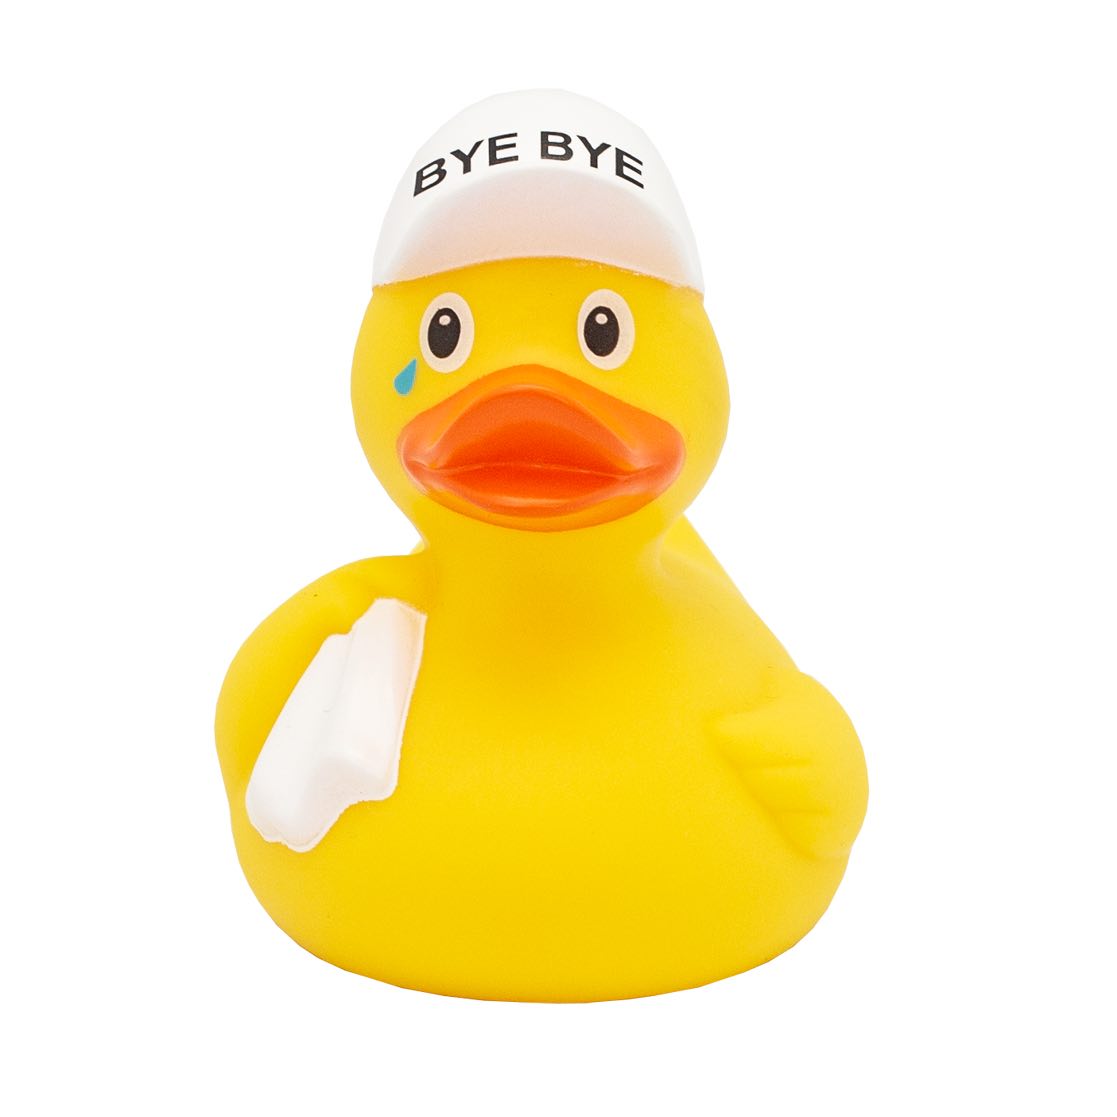 Rubber ducky filled with 'potentially pathogenic' bacteria, study says